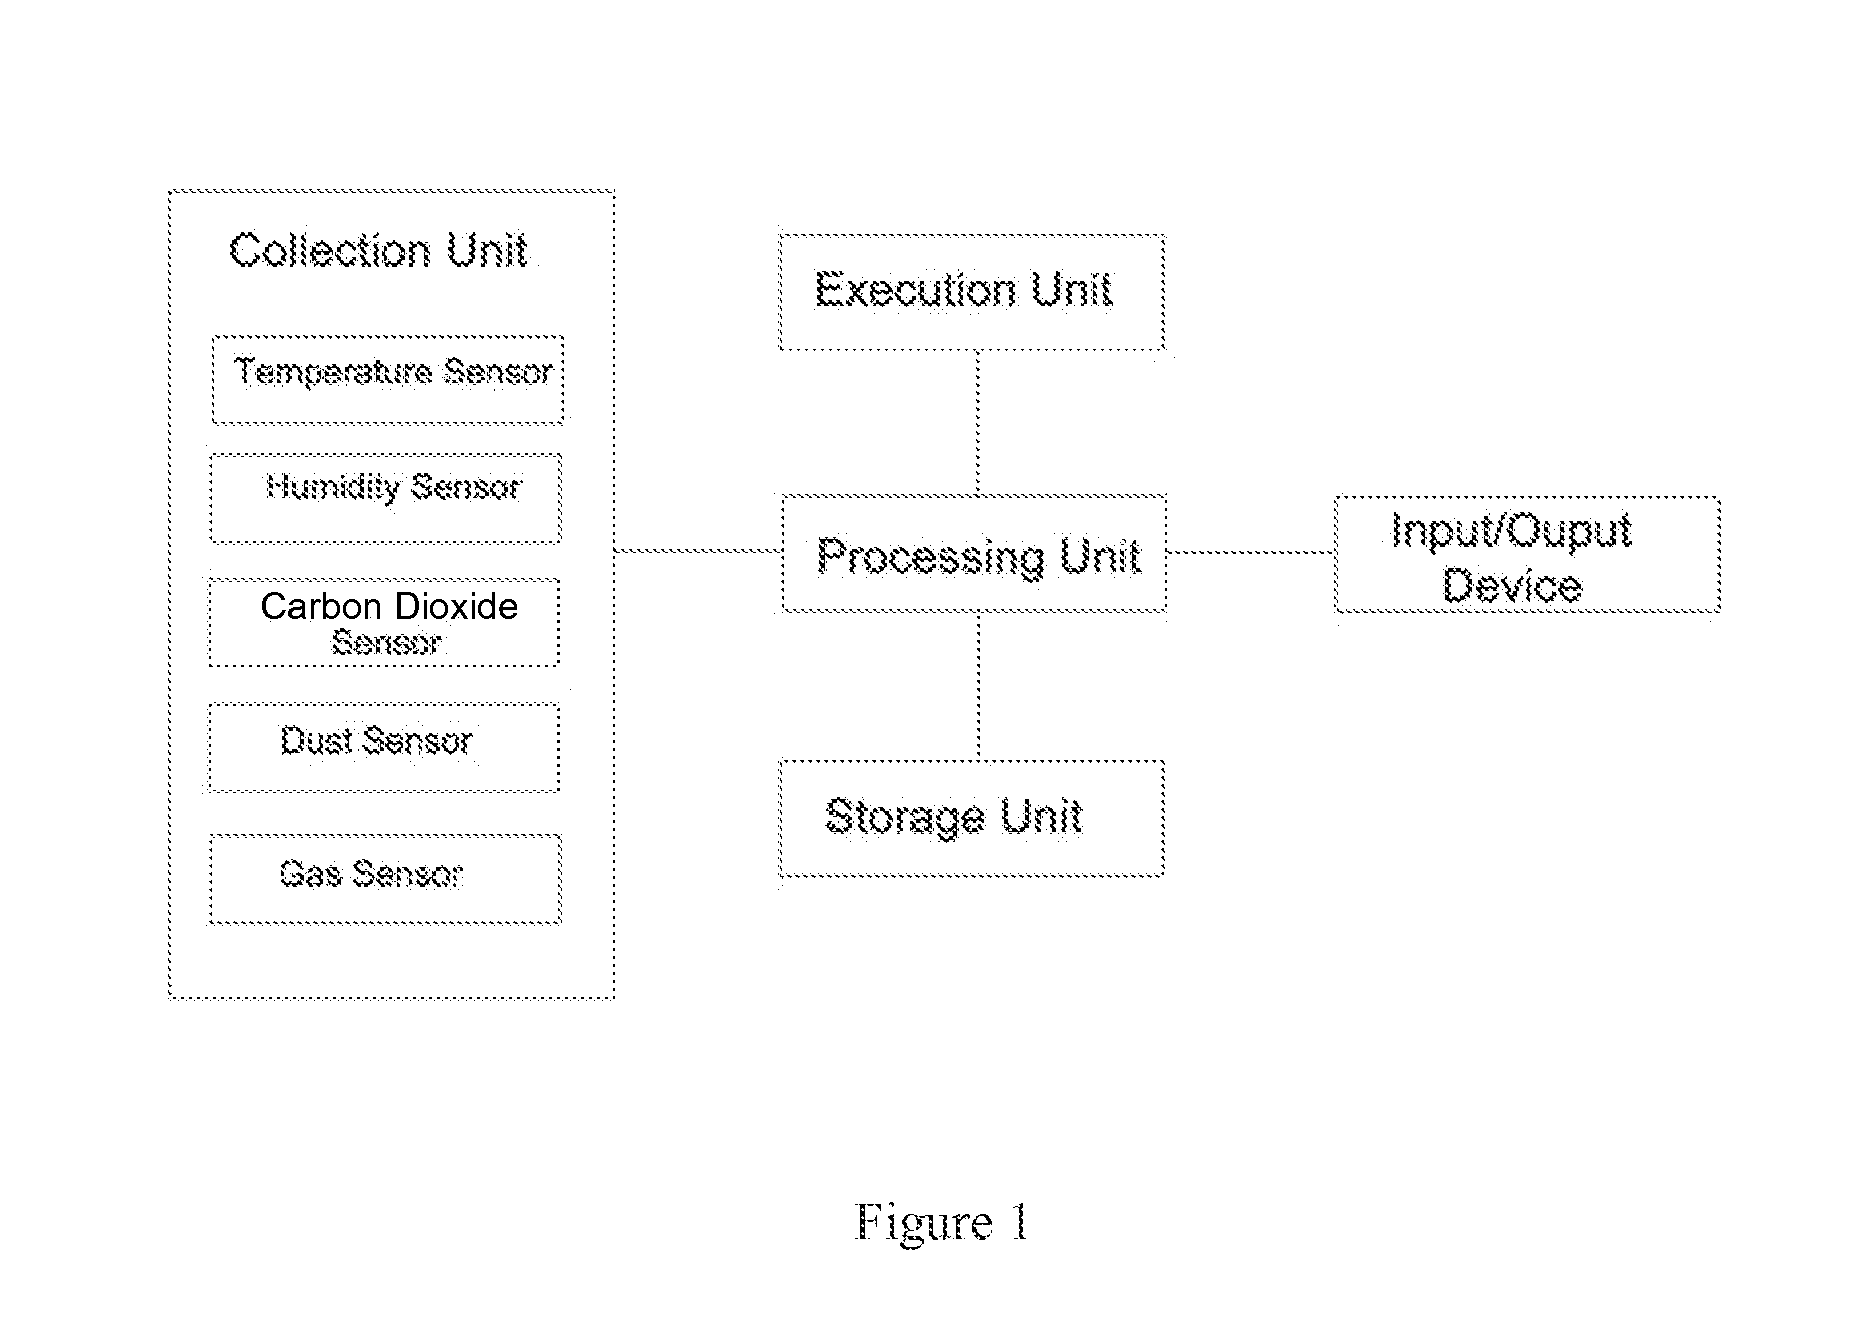 Detecting system and detecting method for air quality based on a robot